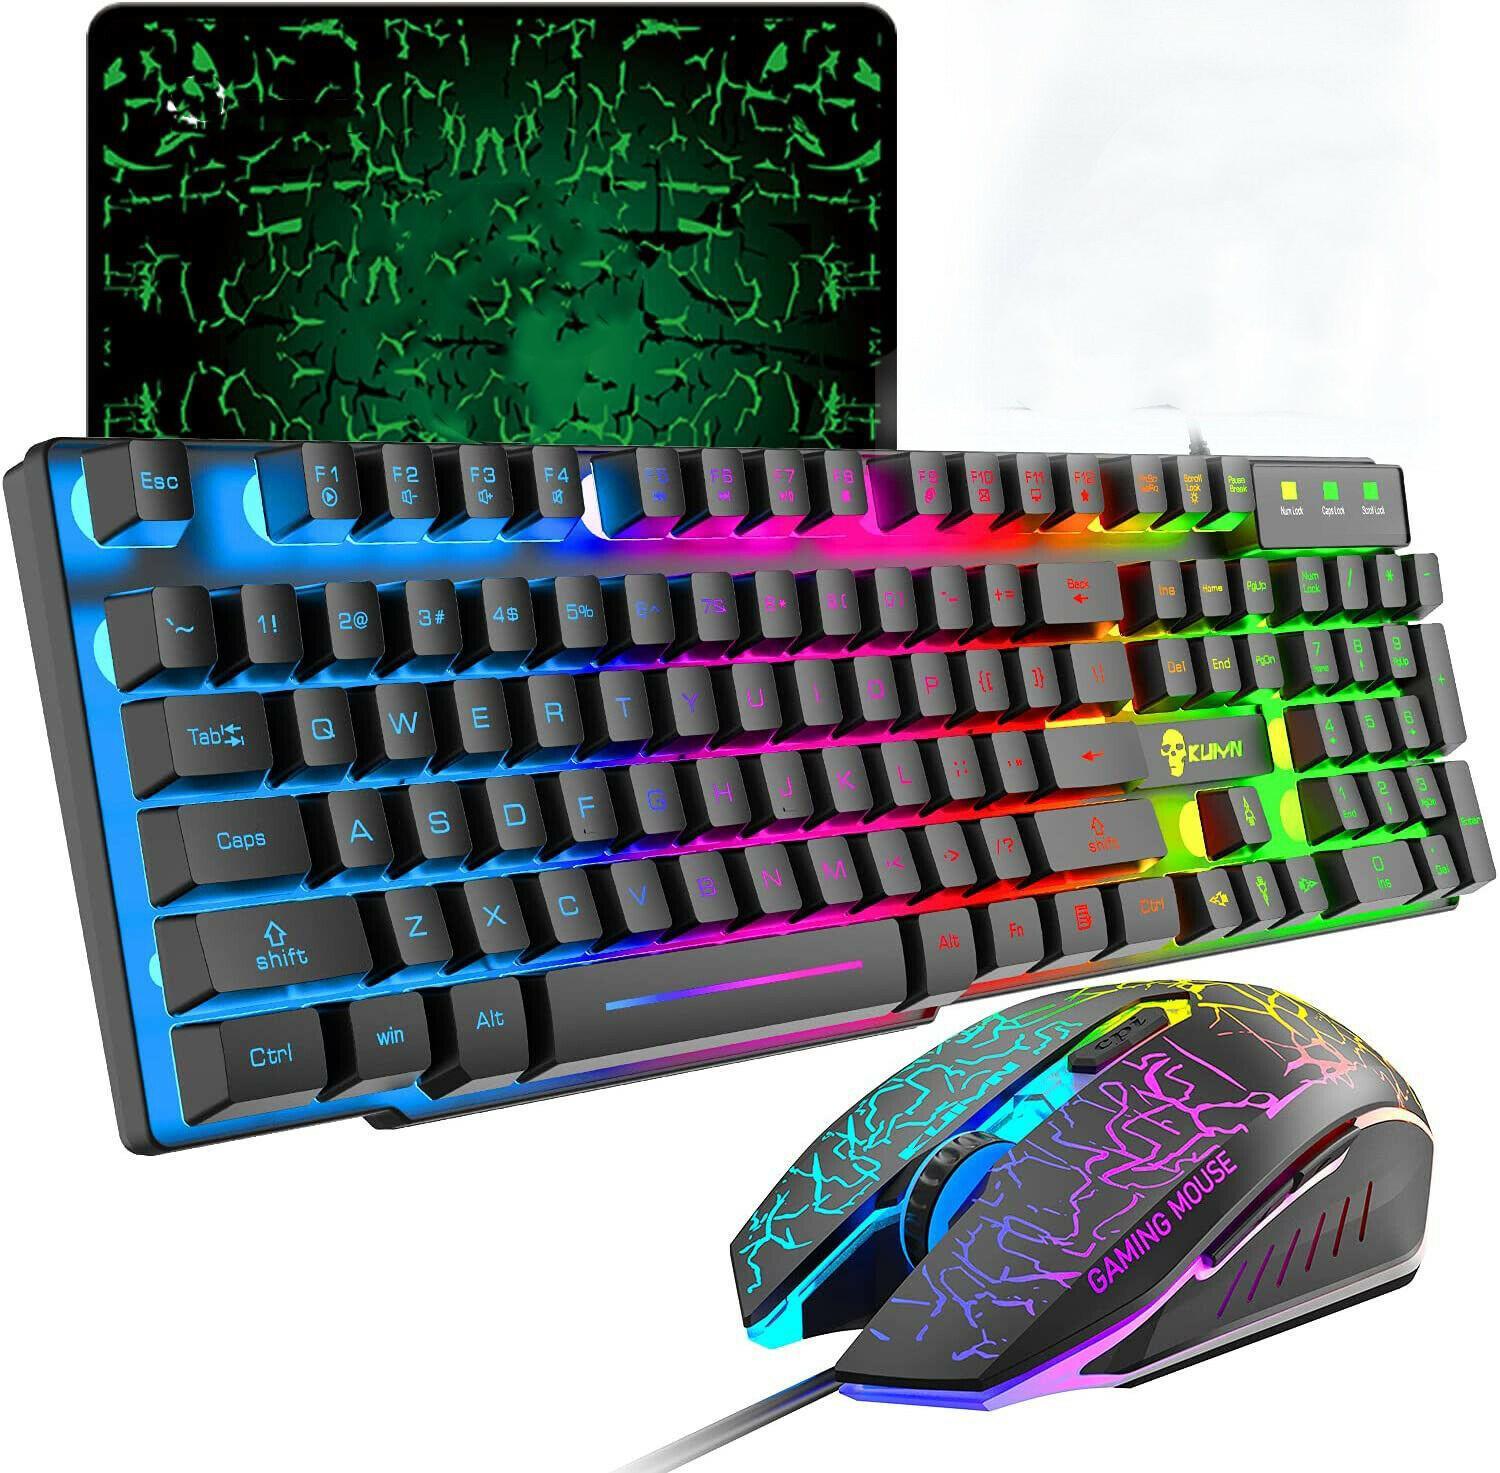 T6 Gaming Keyboard and Mouse Set Mice Pad Rainbow Backlit for PC PS4 Xbox one